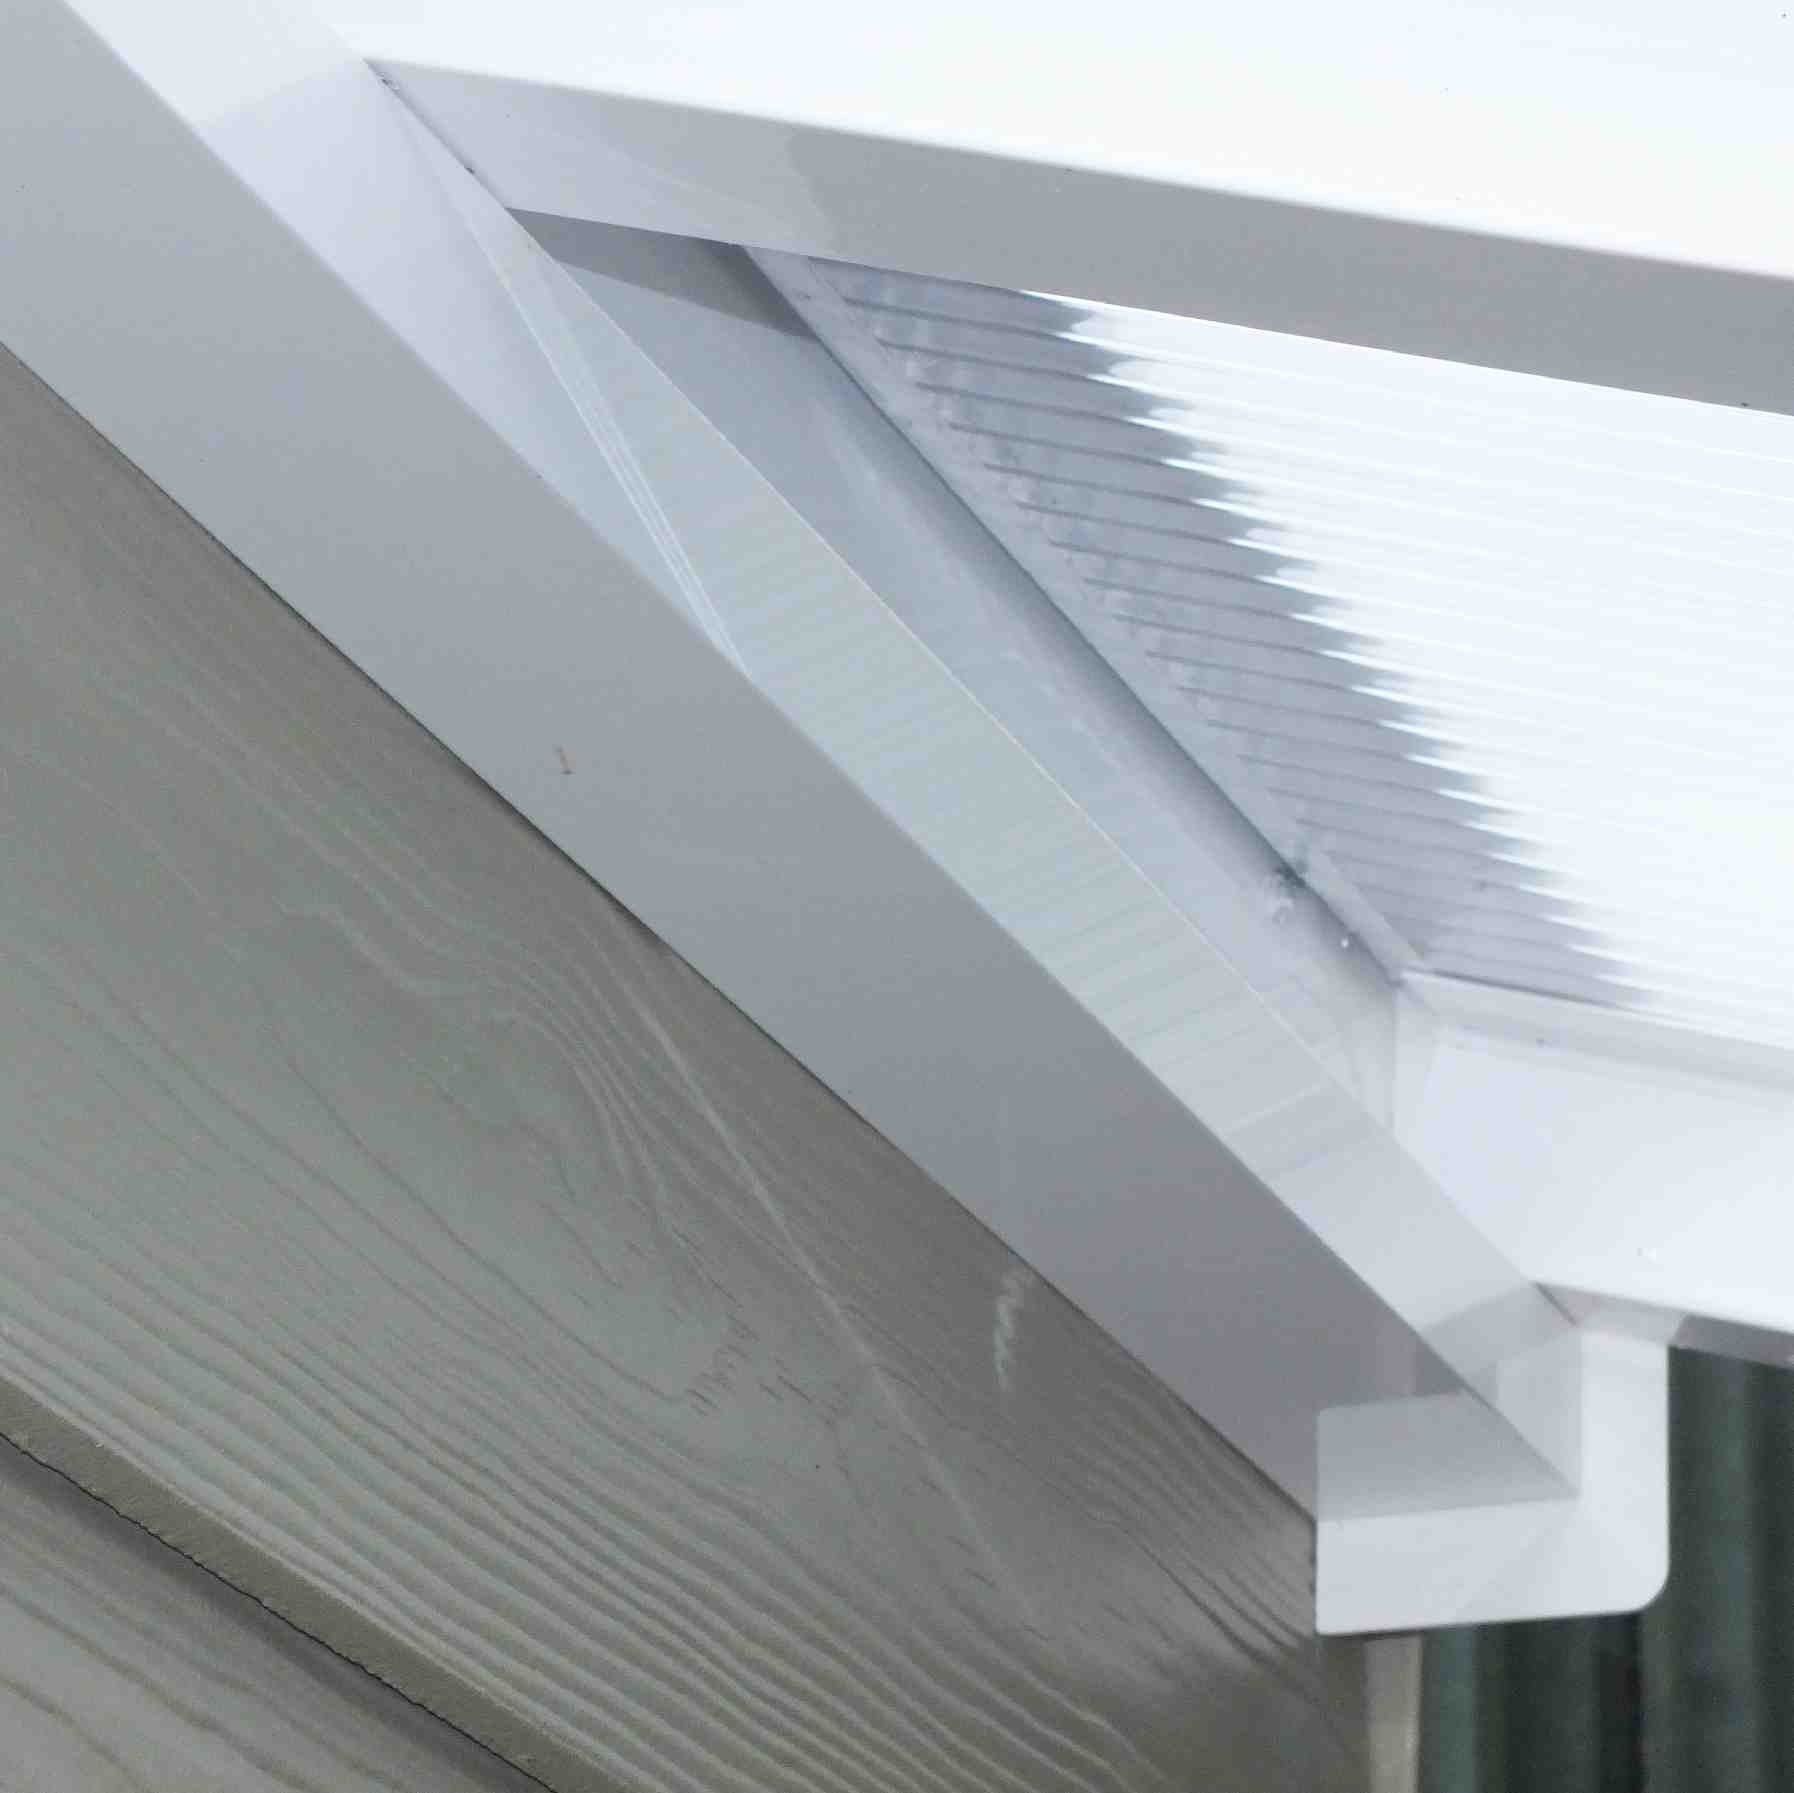 Great deals on Omega Verandah White with 16mm Polycarbonate Glazing - 9.5m (W) x 2.0m (P), (5) Supporting Posts